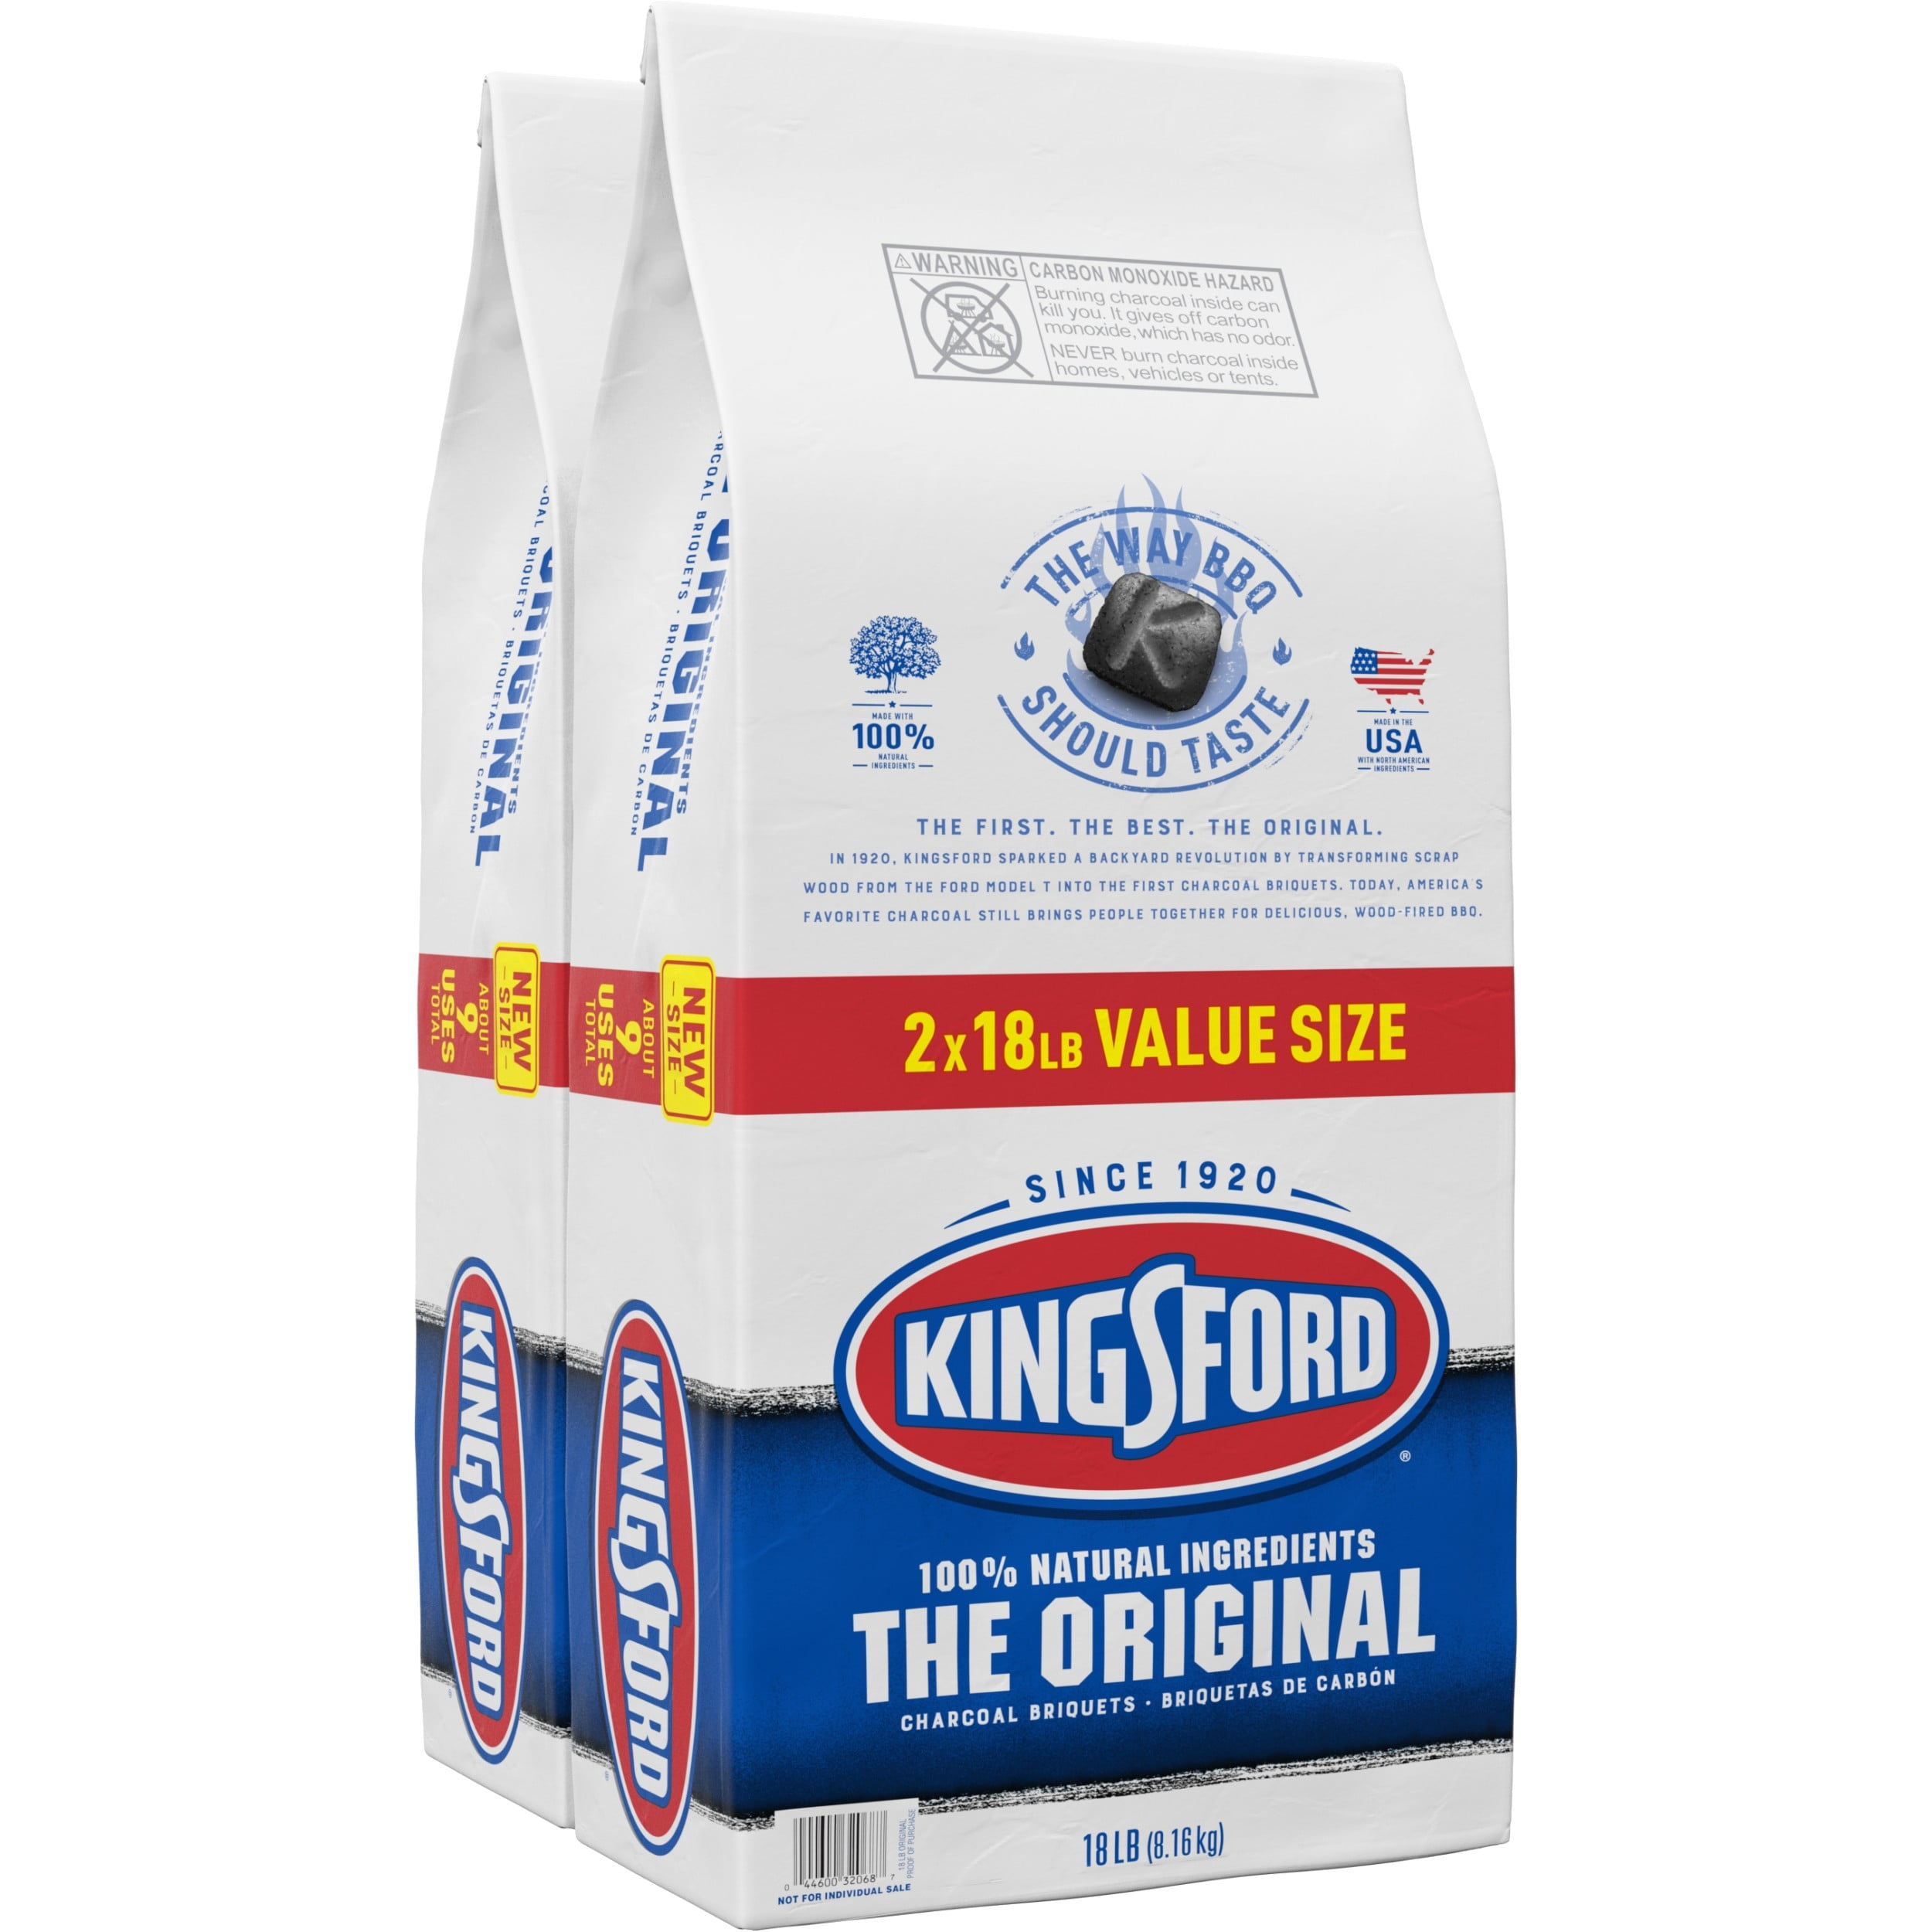 Bbq Charcoal For Grilling 18 Pounds... Kingsford Original Charcoal Briquettes